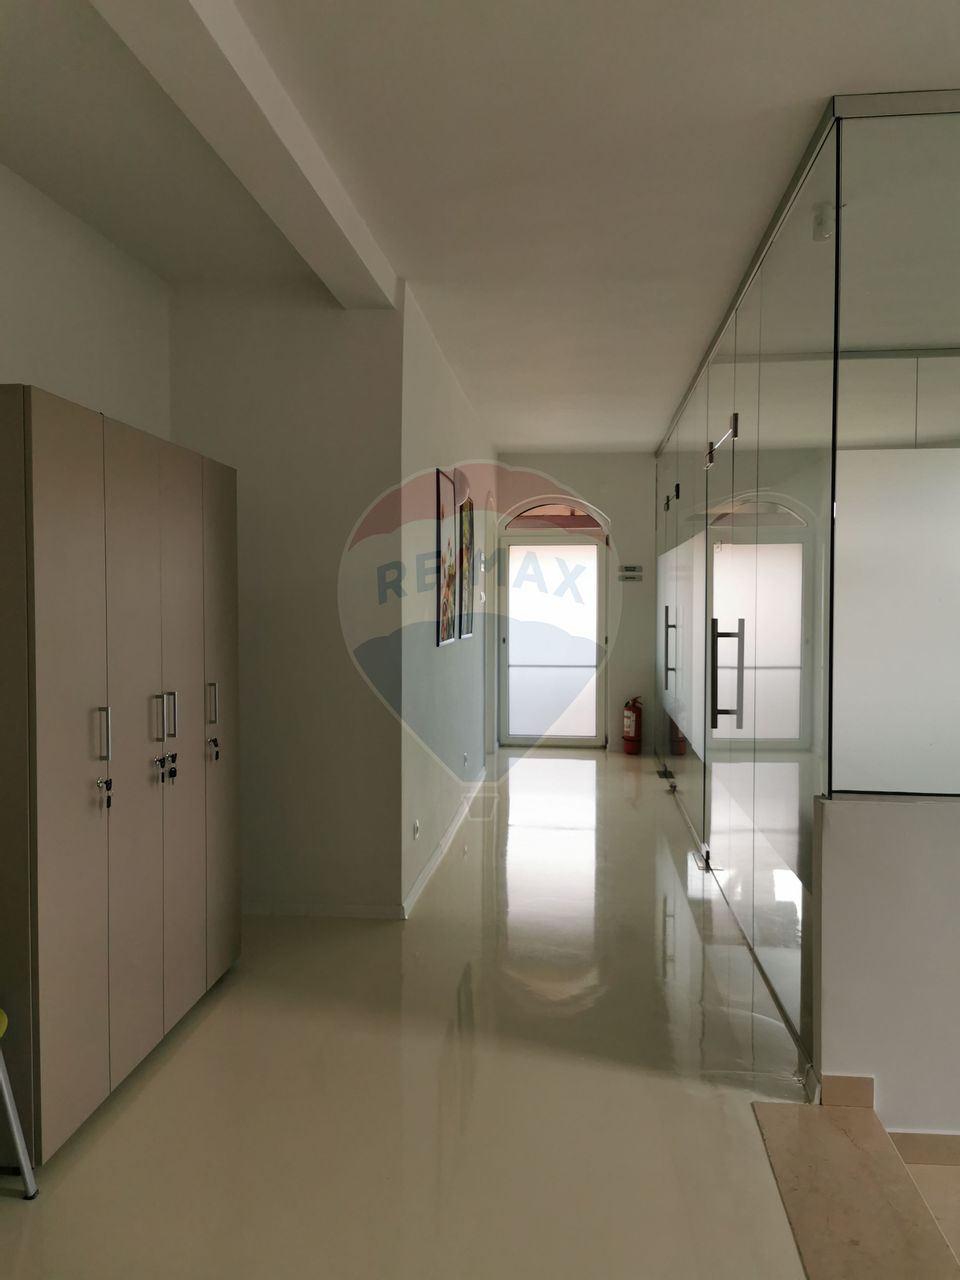 350sq.m Commercial Space for rent, Grigorescu area